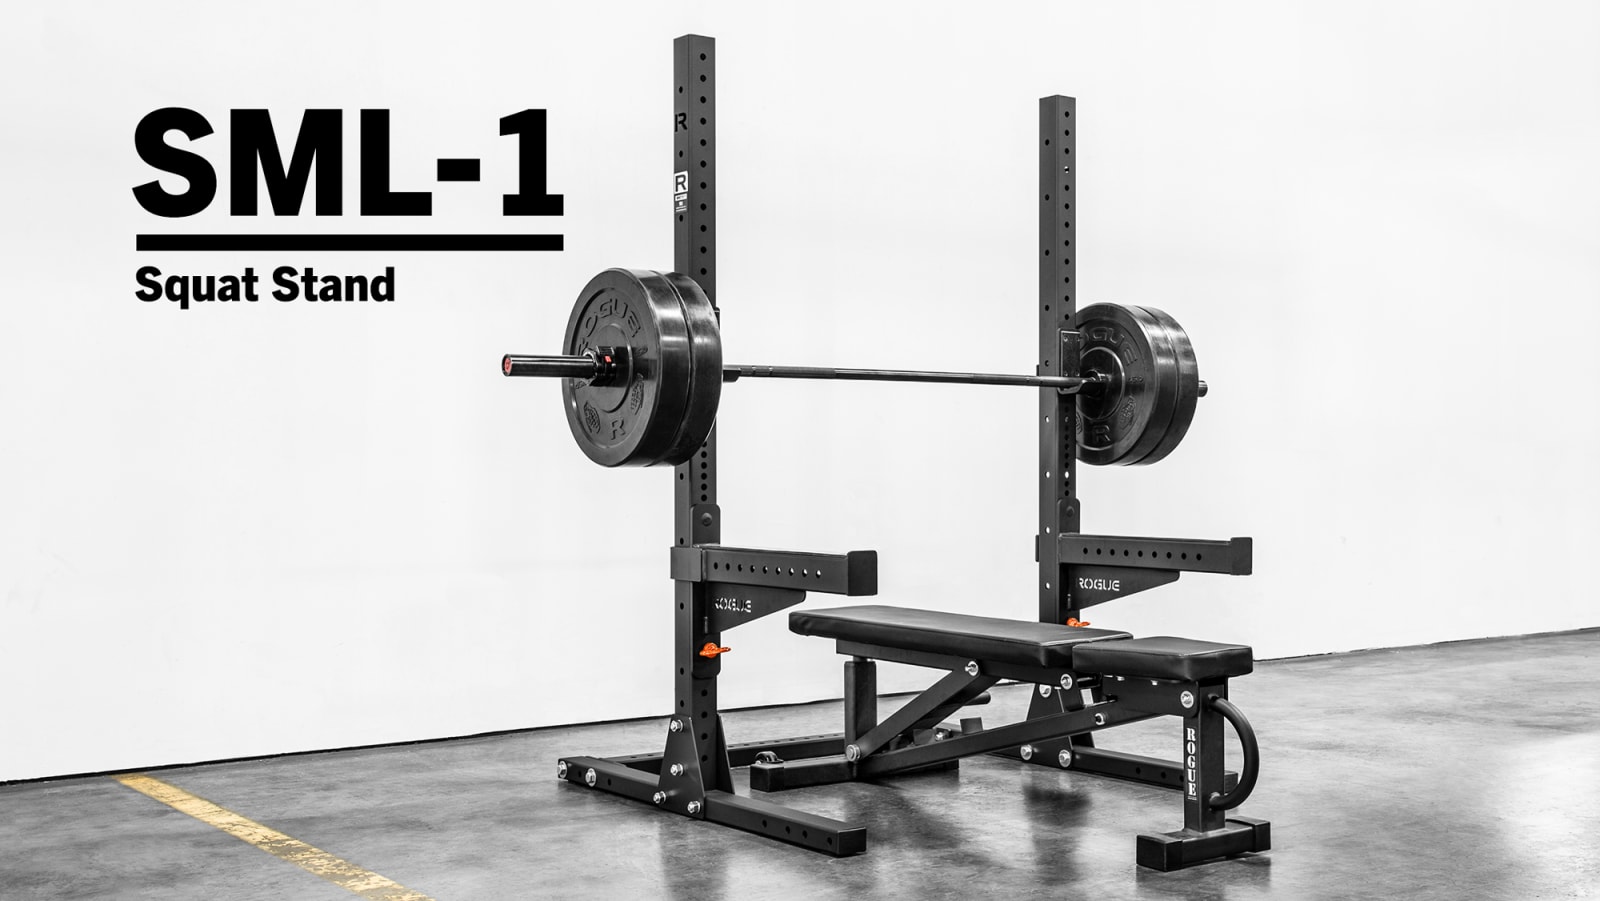 OLYMPIC SQUAT RACK BARBELL ADJUSTABLE BENCH PRESS WEIGHT POWER STAND S1 